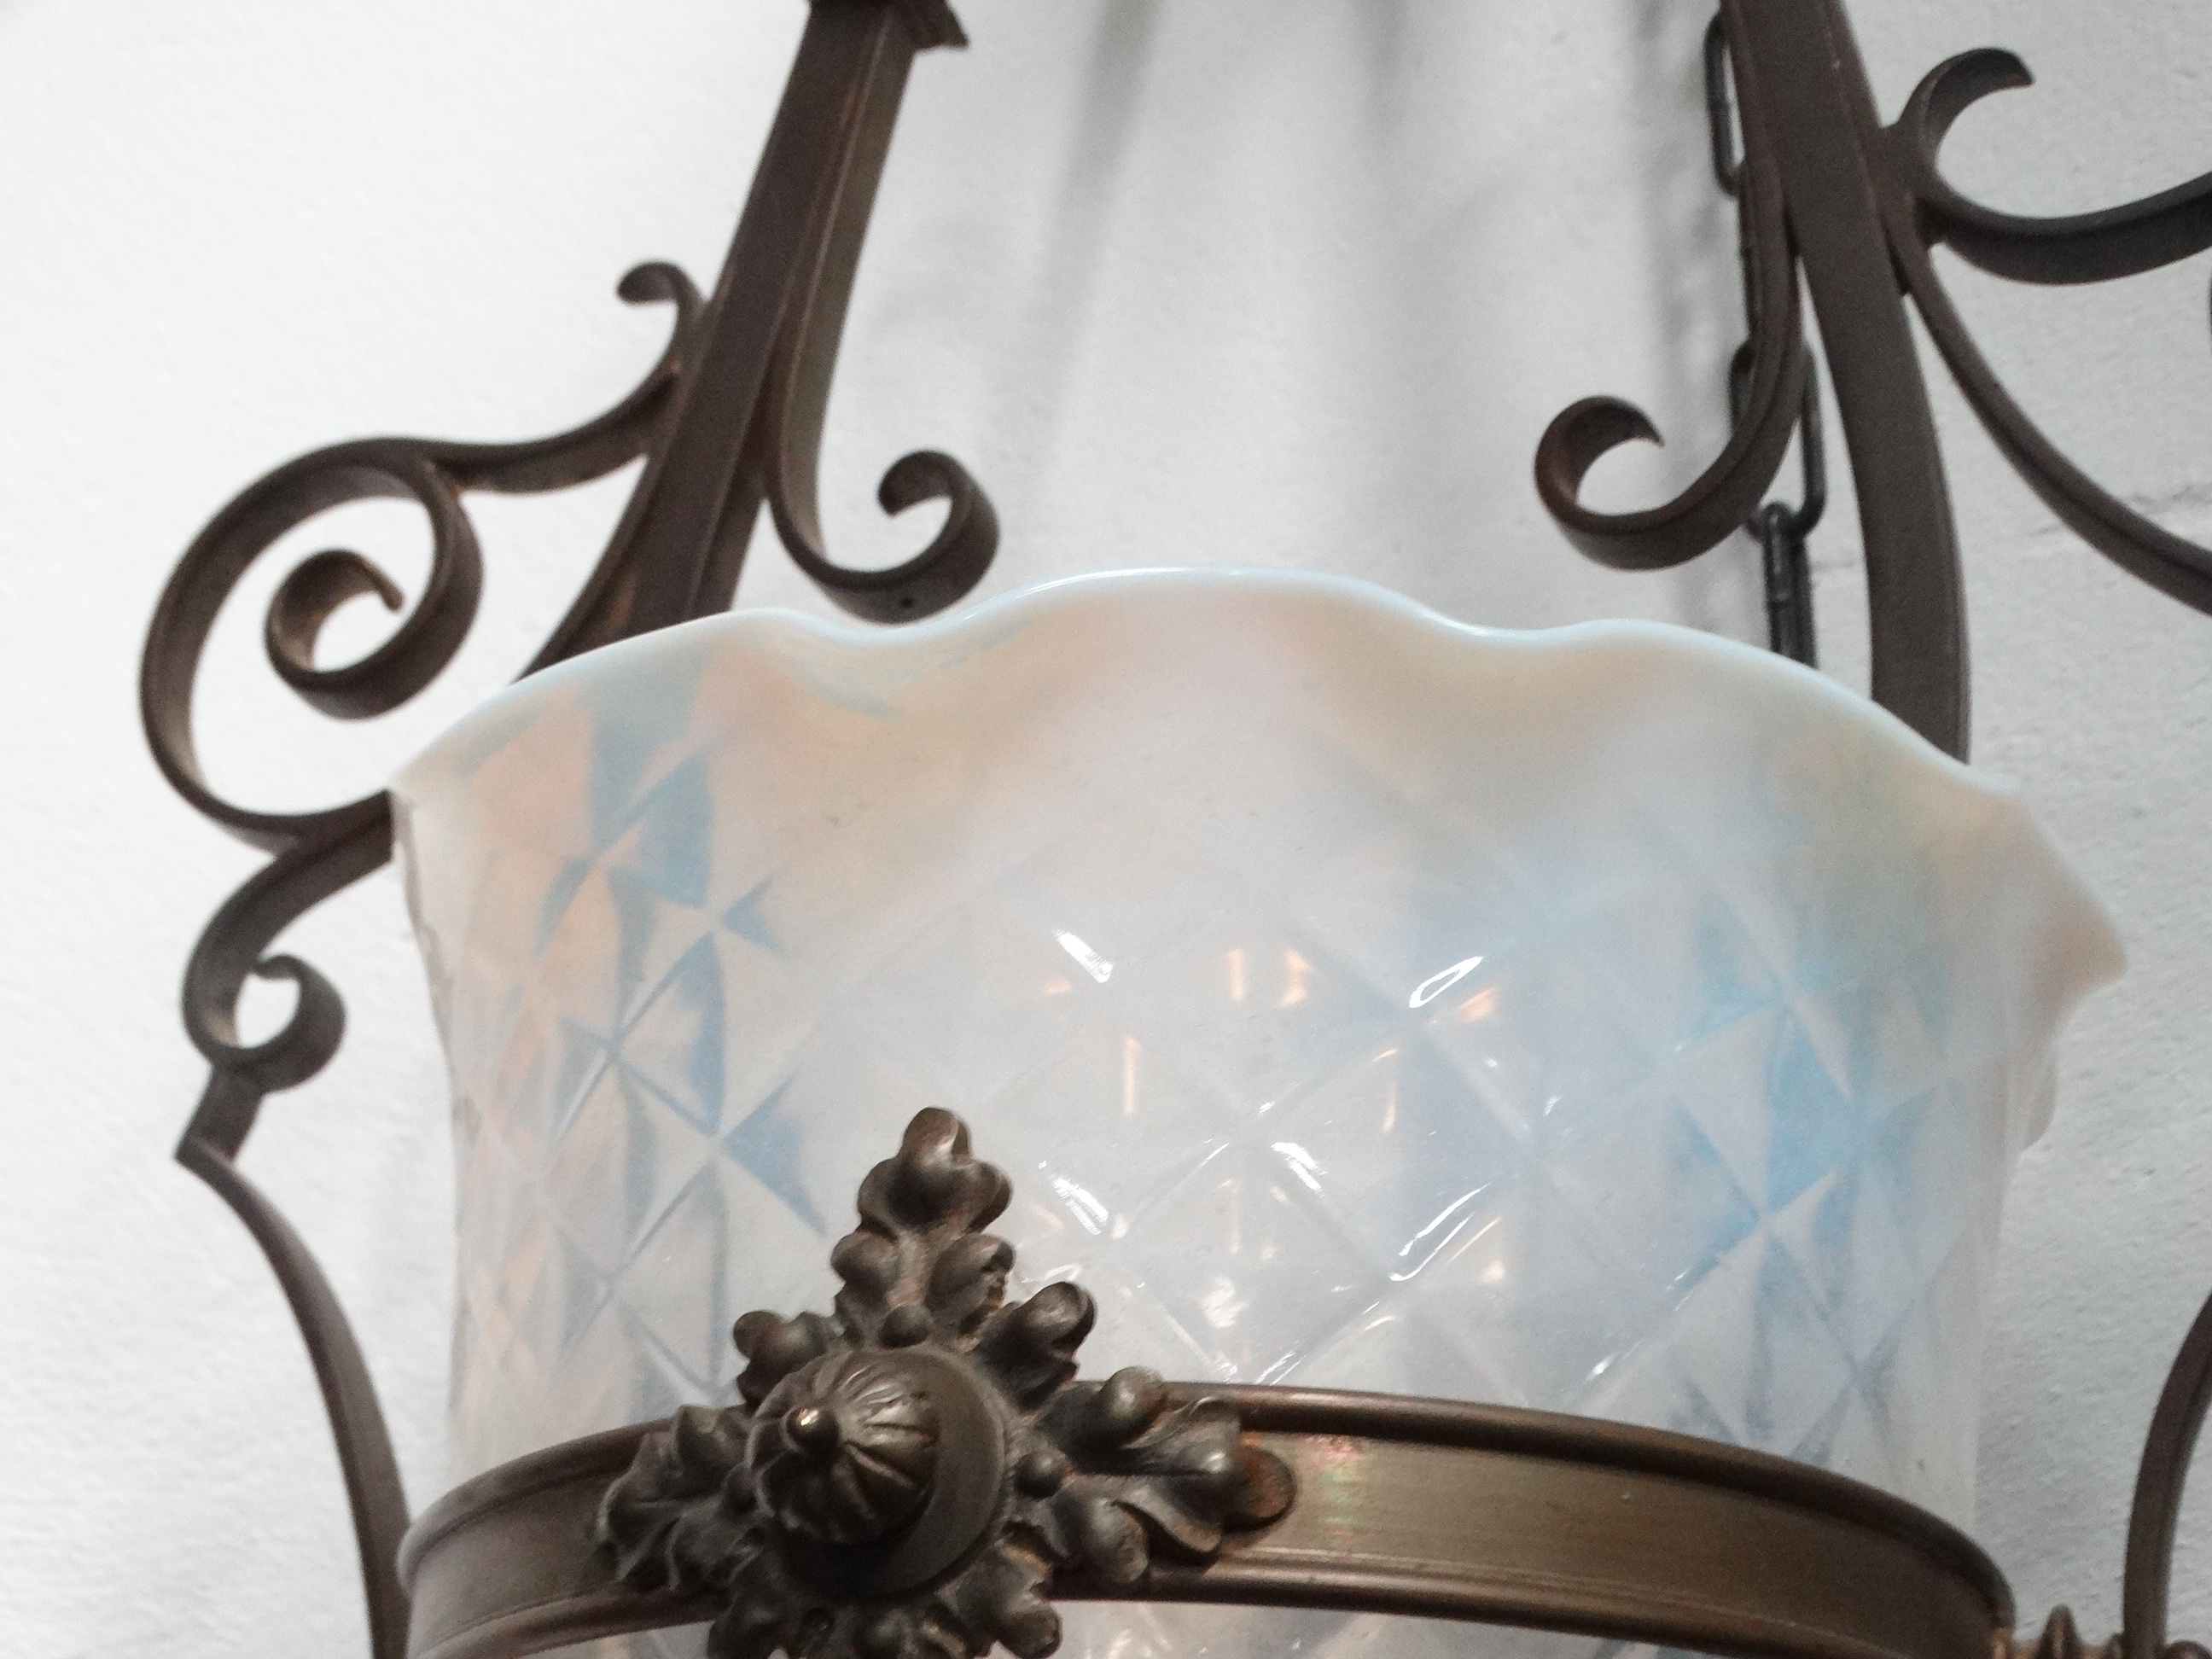 19th century vaseline glass and brass pendant light - An ornate light fitting with large dappled - Image 5 of 10